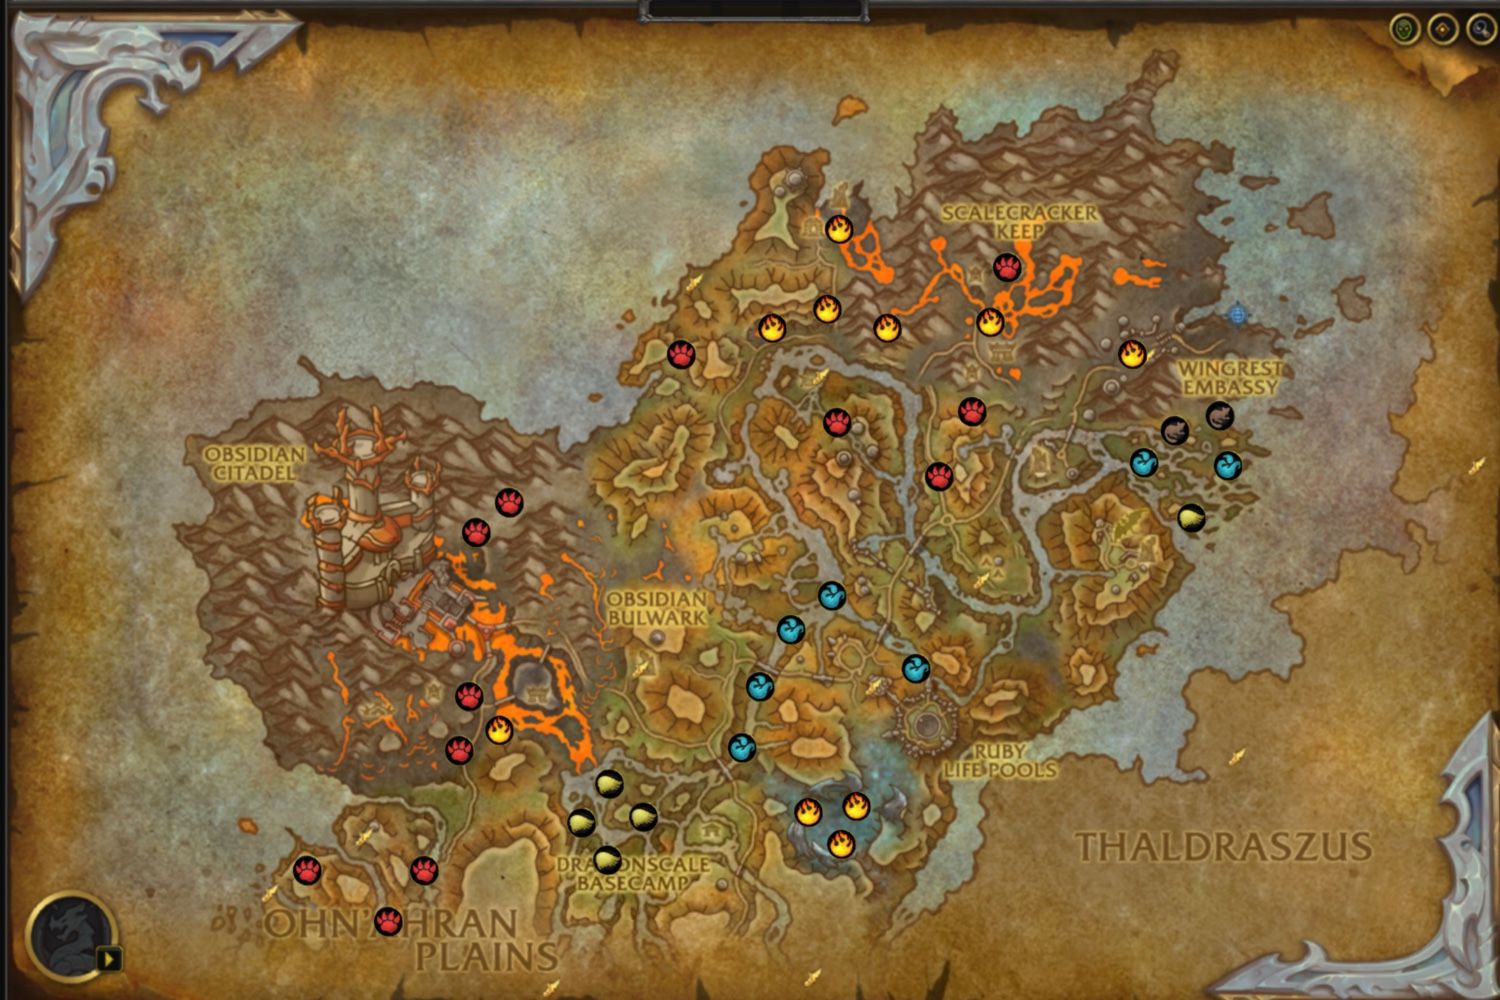 In-game map depicting the Waking Shores with battle pet location icons.